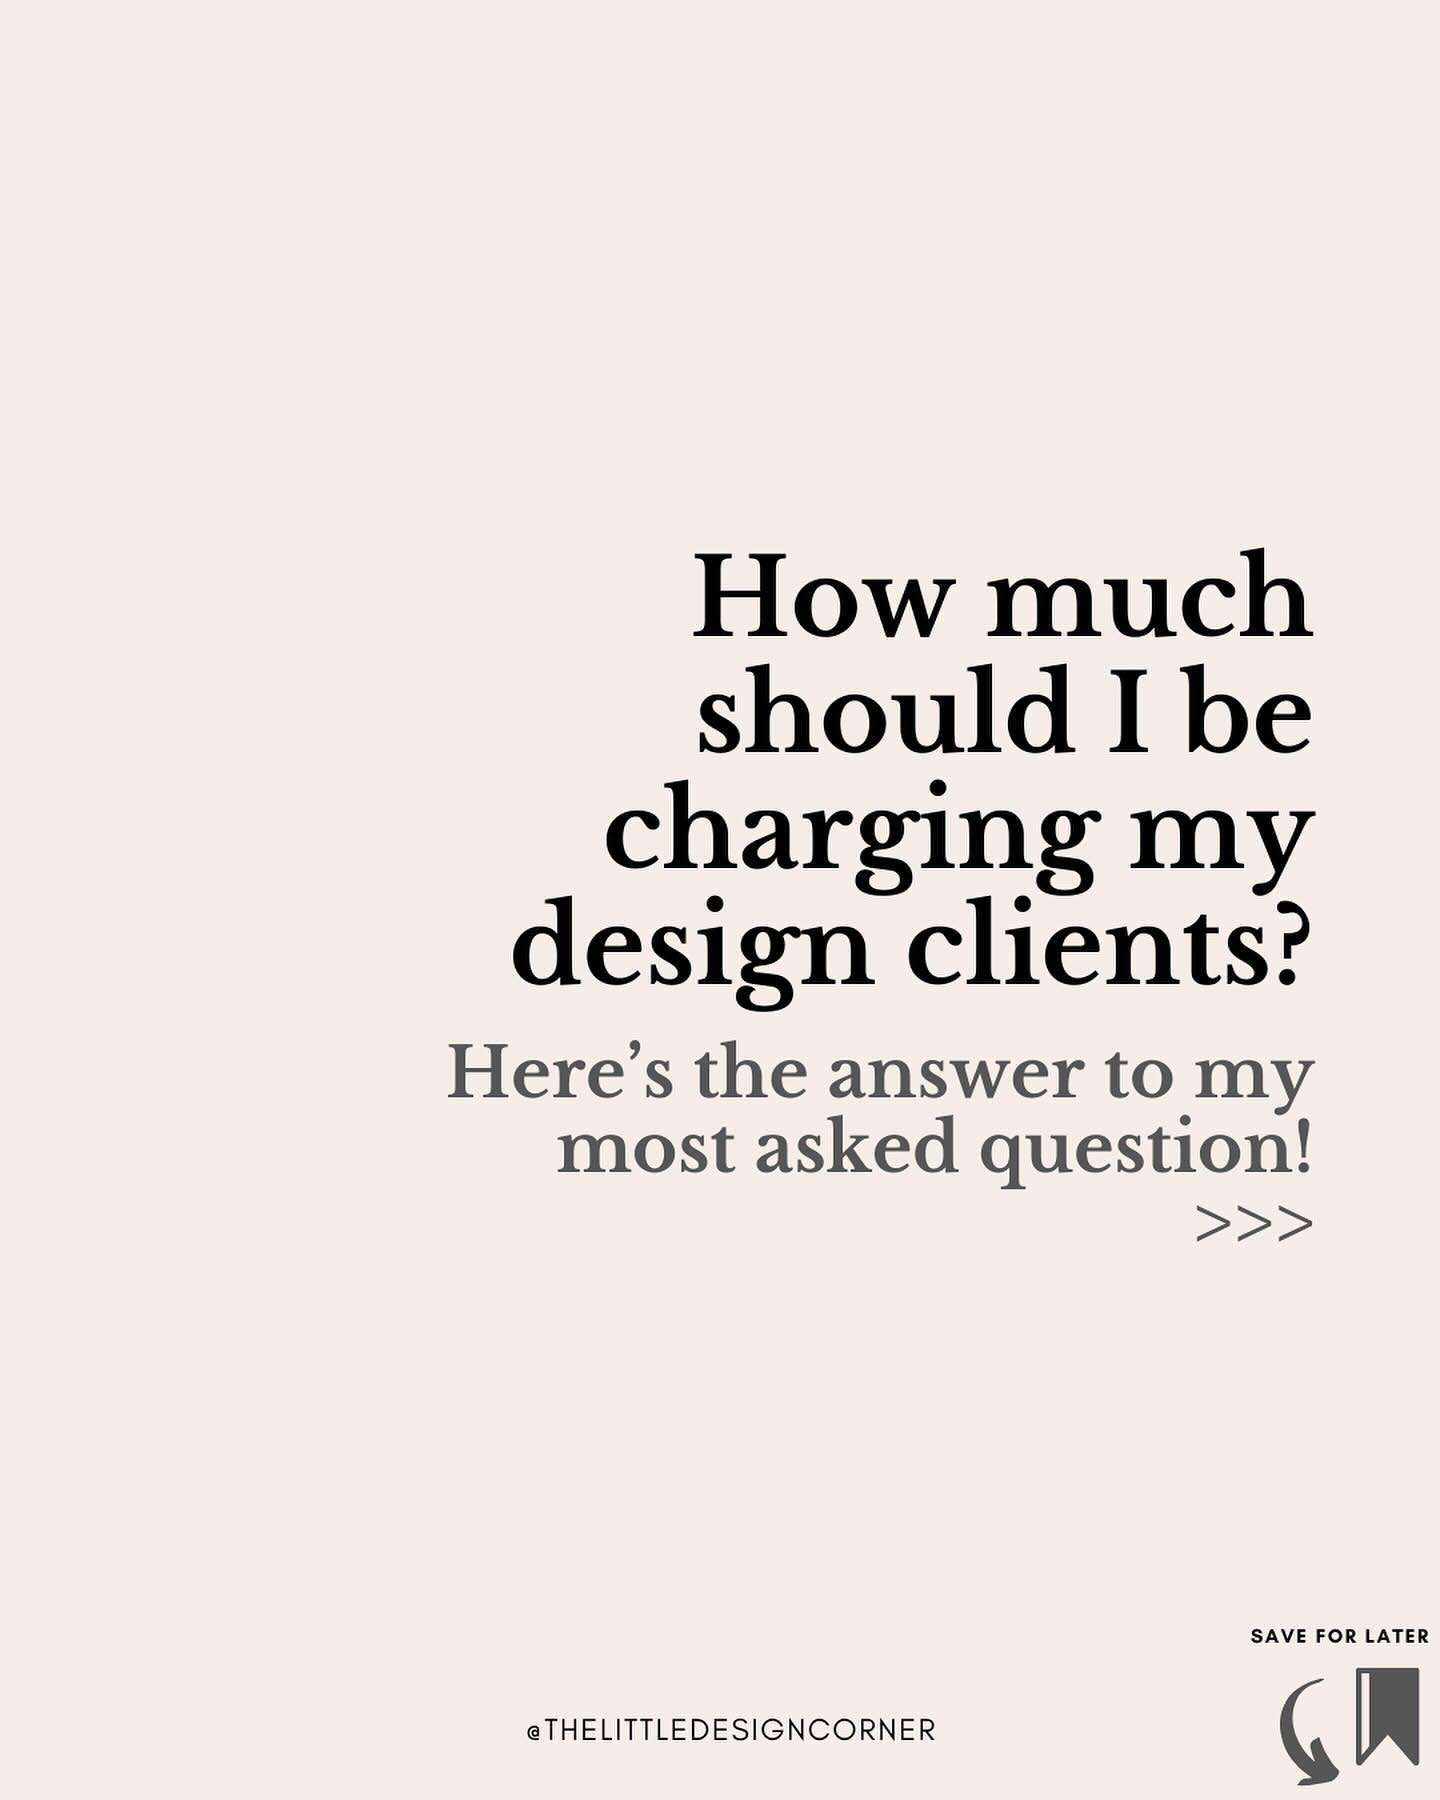 Why can some designers charge so much more than you to do exactly the same thing?

Because they use a value based pricing model.

This is a pricing strategy where the price of a service is based on its perceived value to the client, rather than on wh